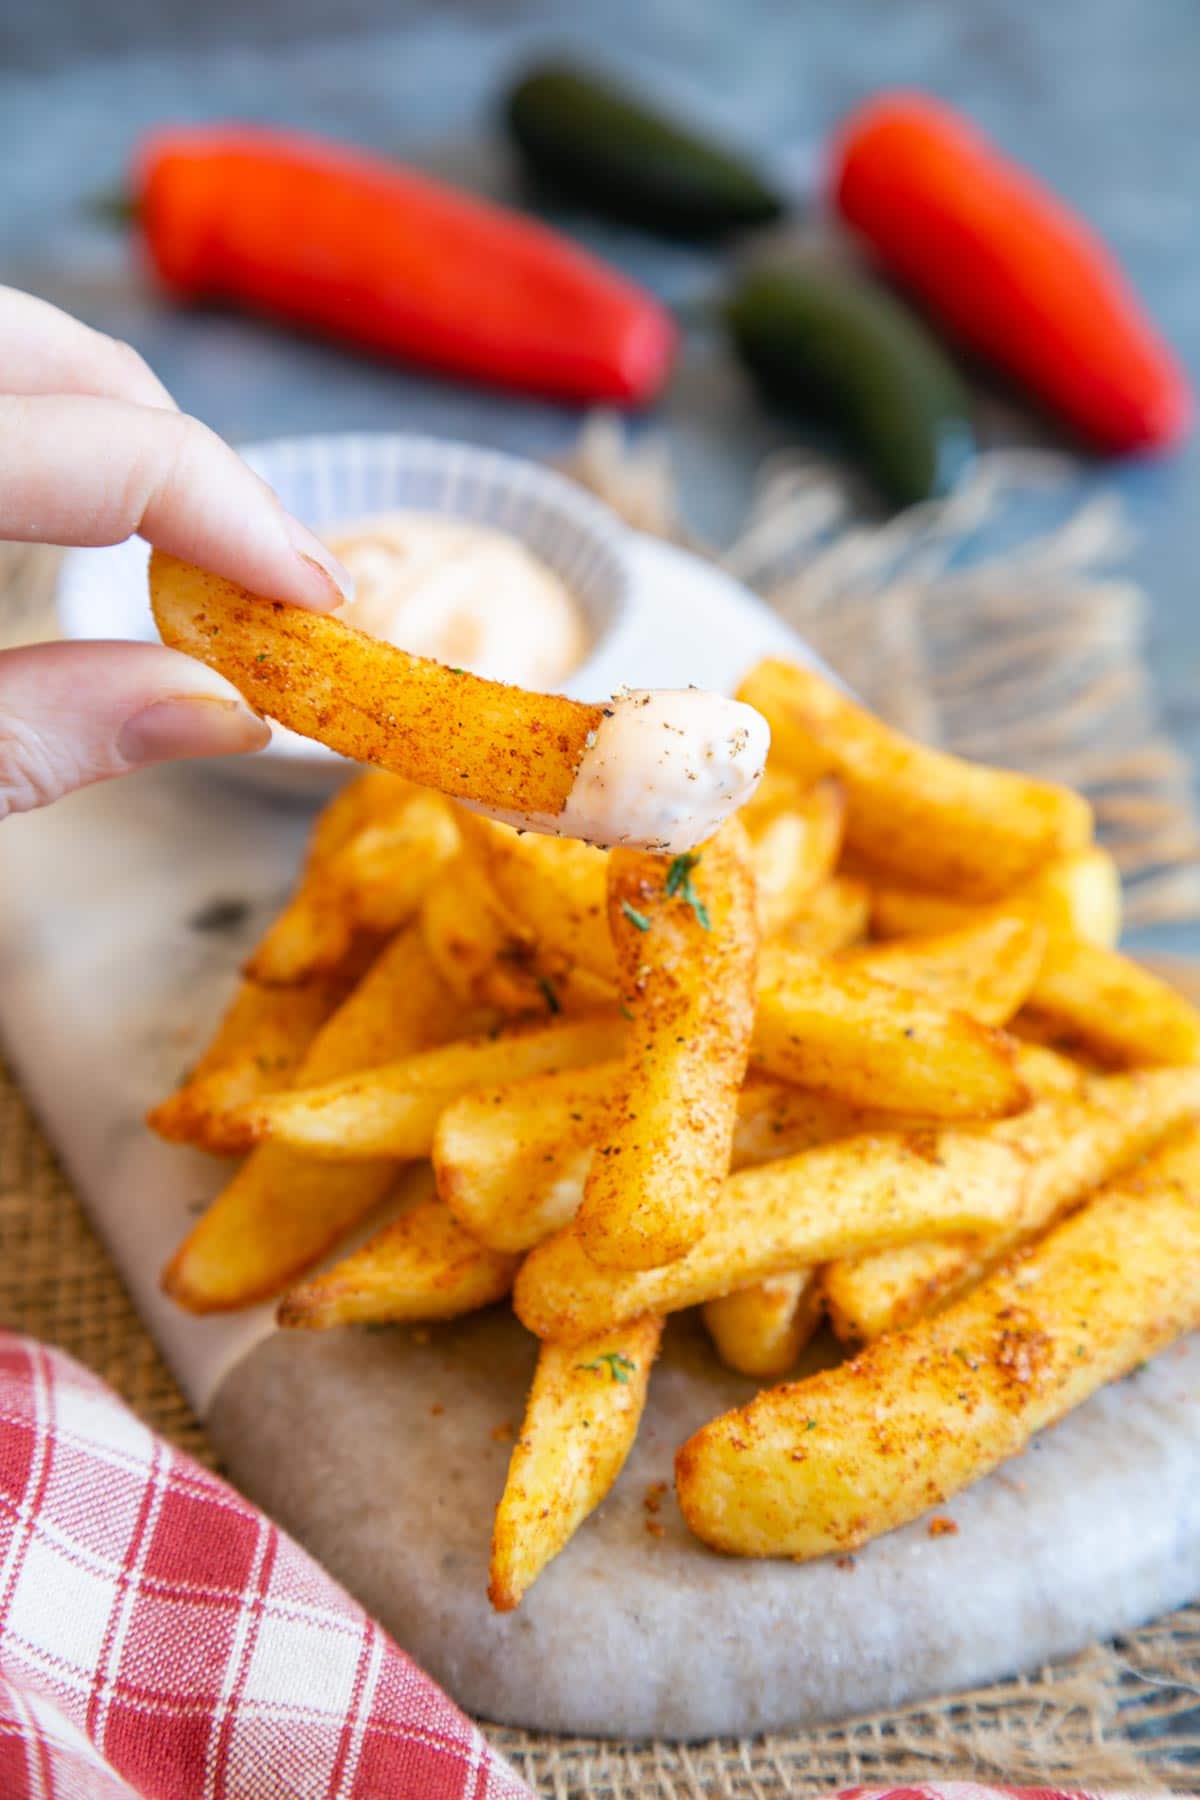 Spicy peri peri fries with a seasoned dip, just like you get at Nando's